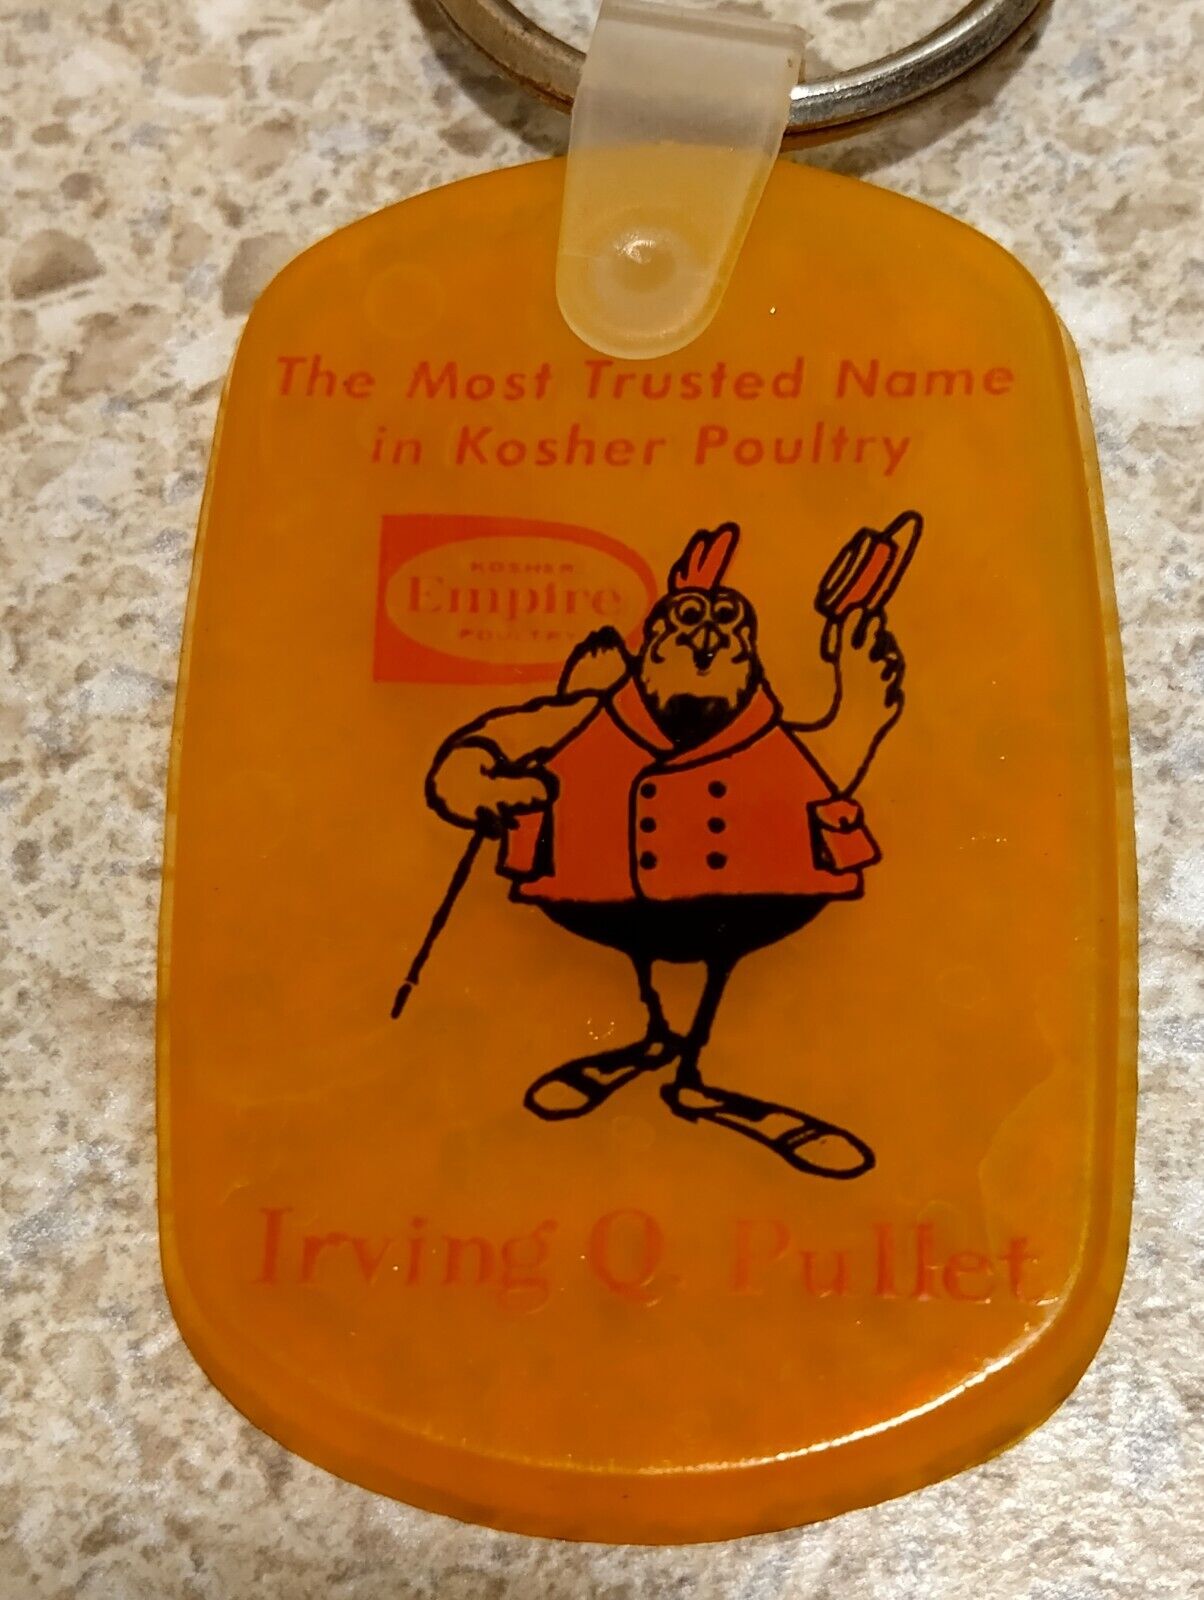 Vintage IRVING Q PULLET EMPIRE KOSHER POULTRY Chicken Mascot Keychain NY